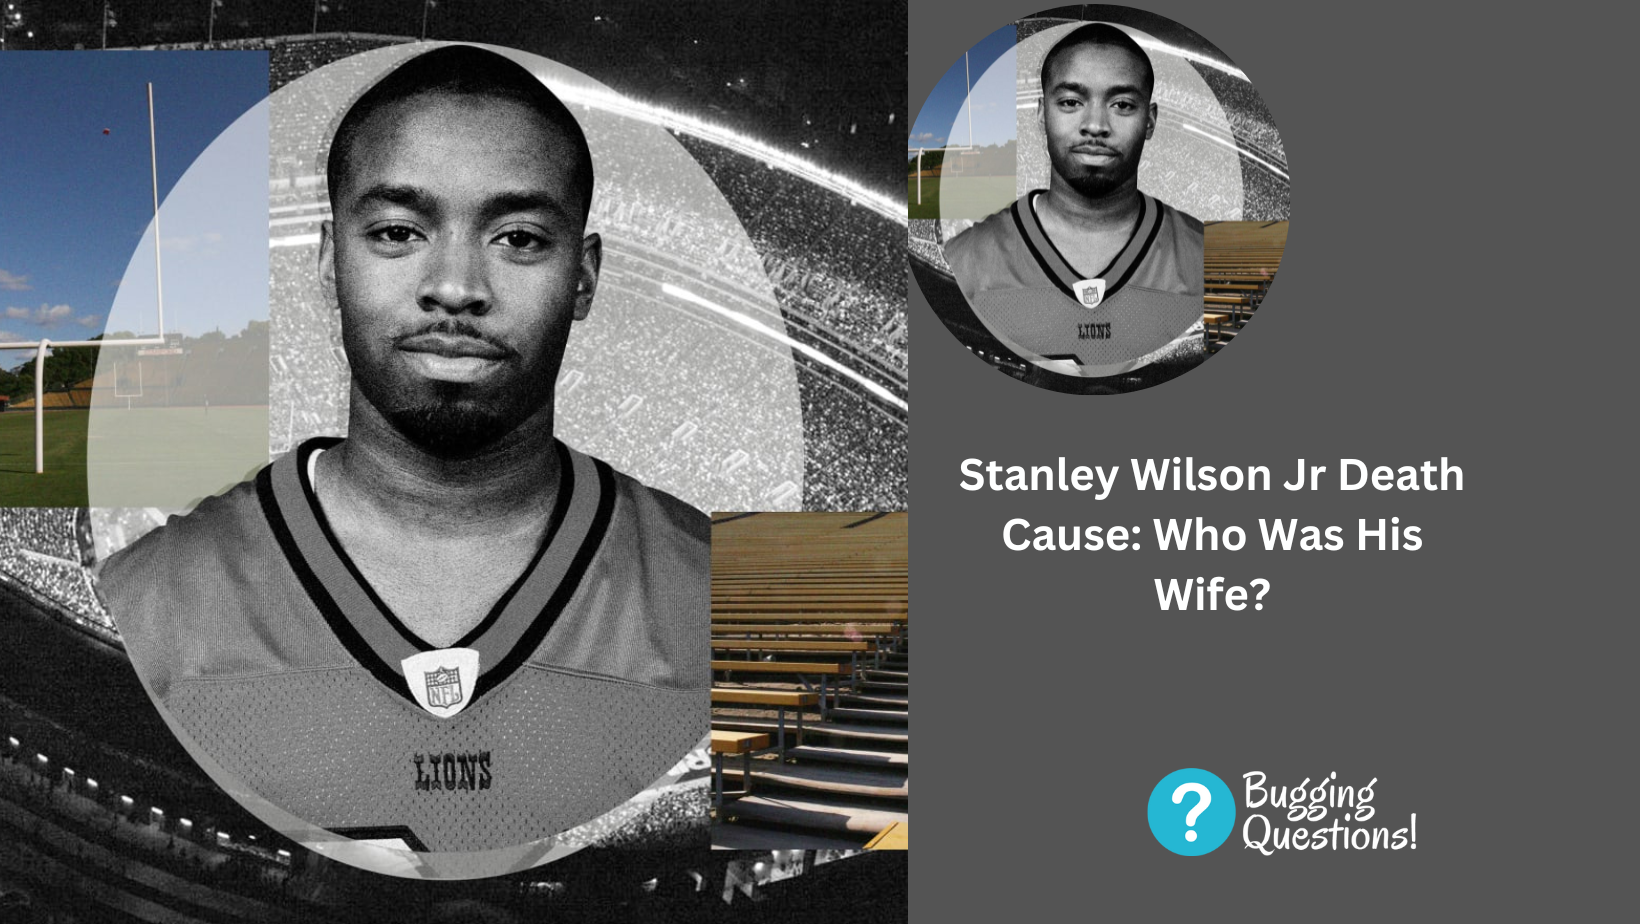 Stanley Wilson Jr Death Cause: Who Was His Wife?